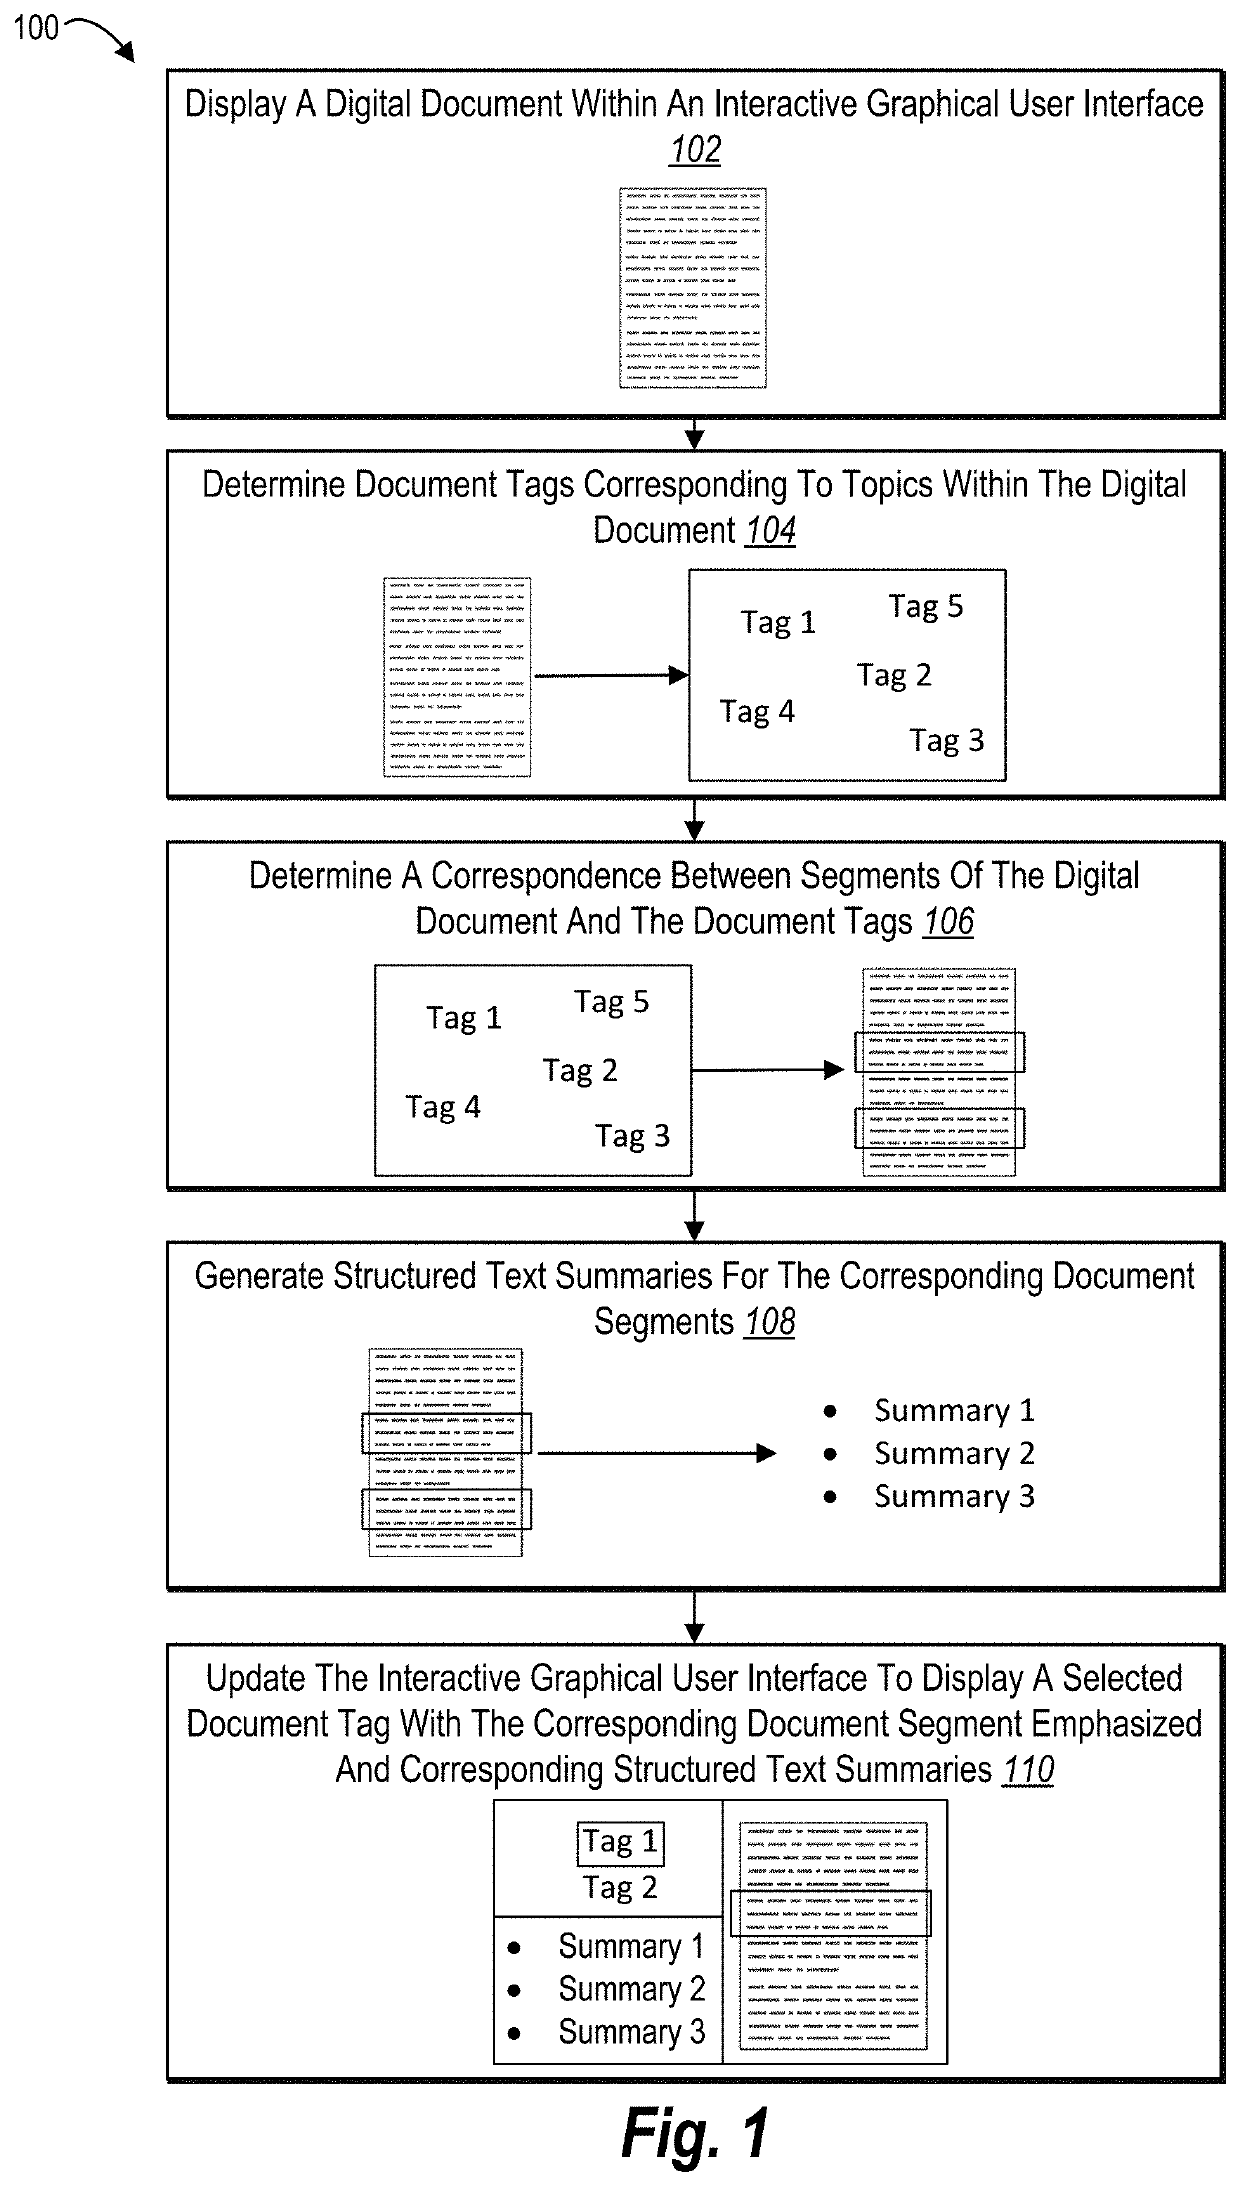 Generating structured text summaries of digital documents using interactive collaboration